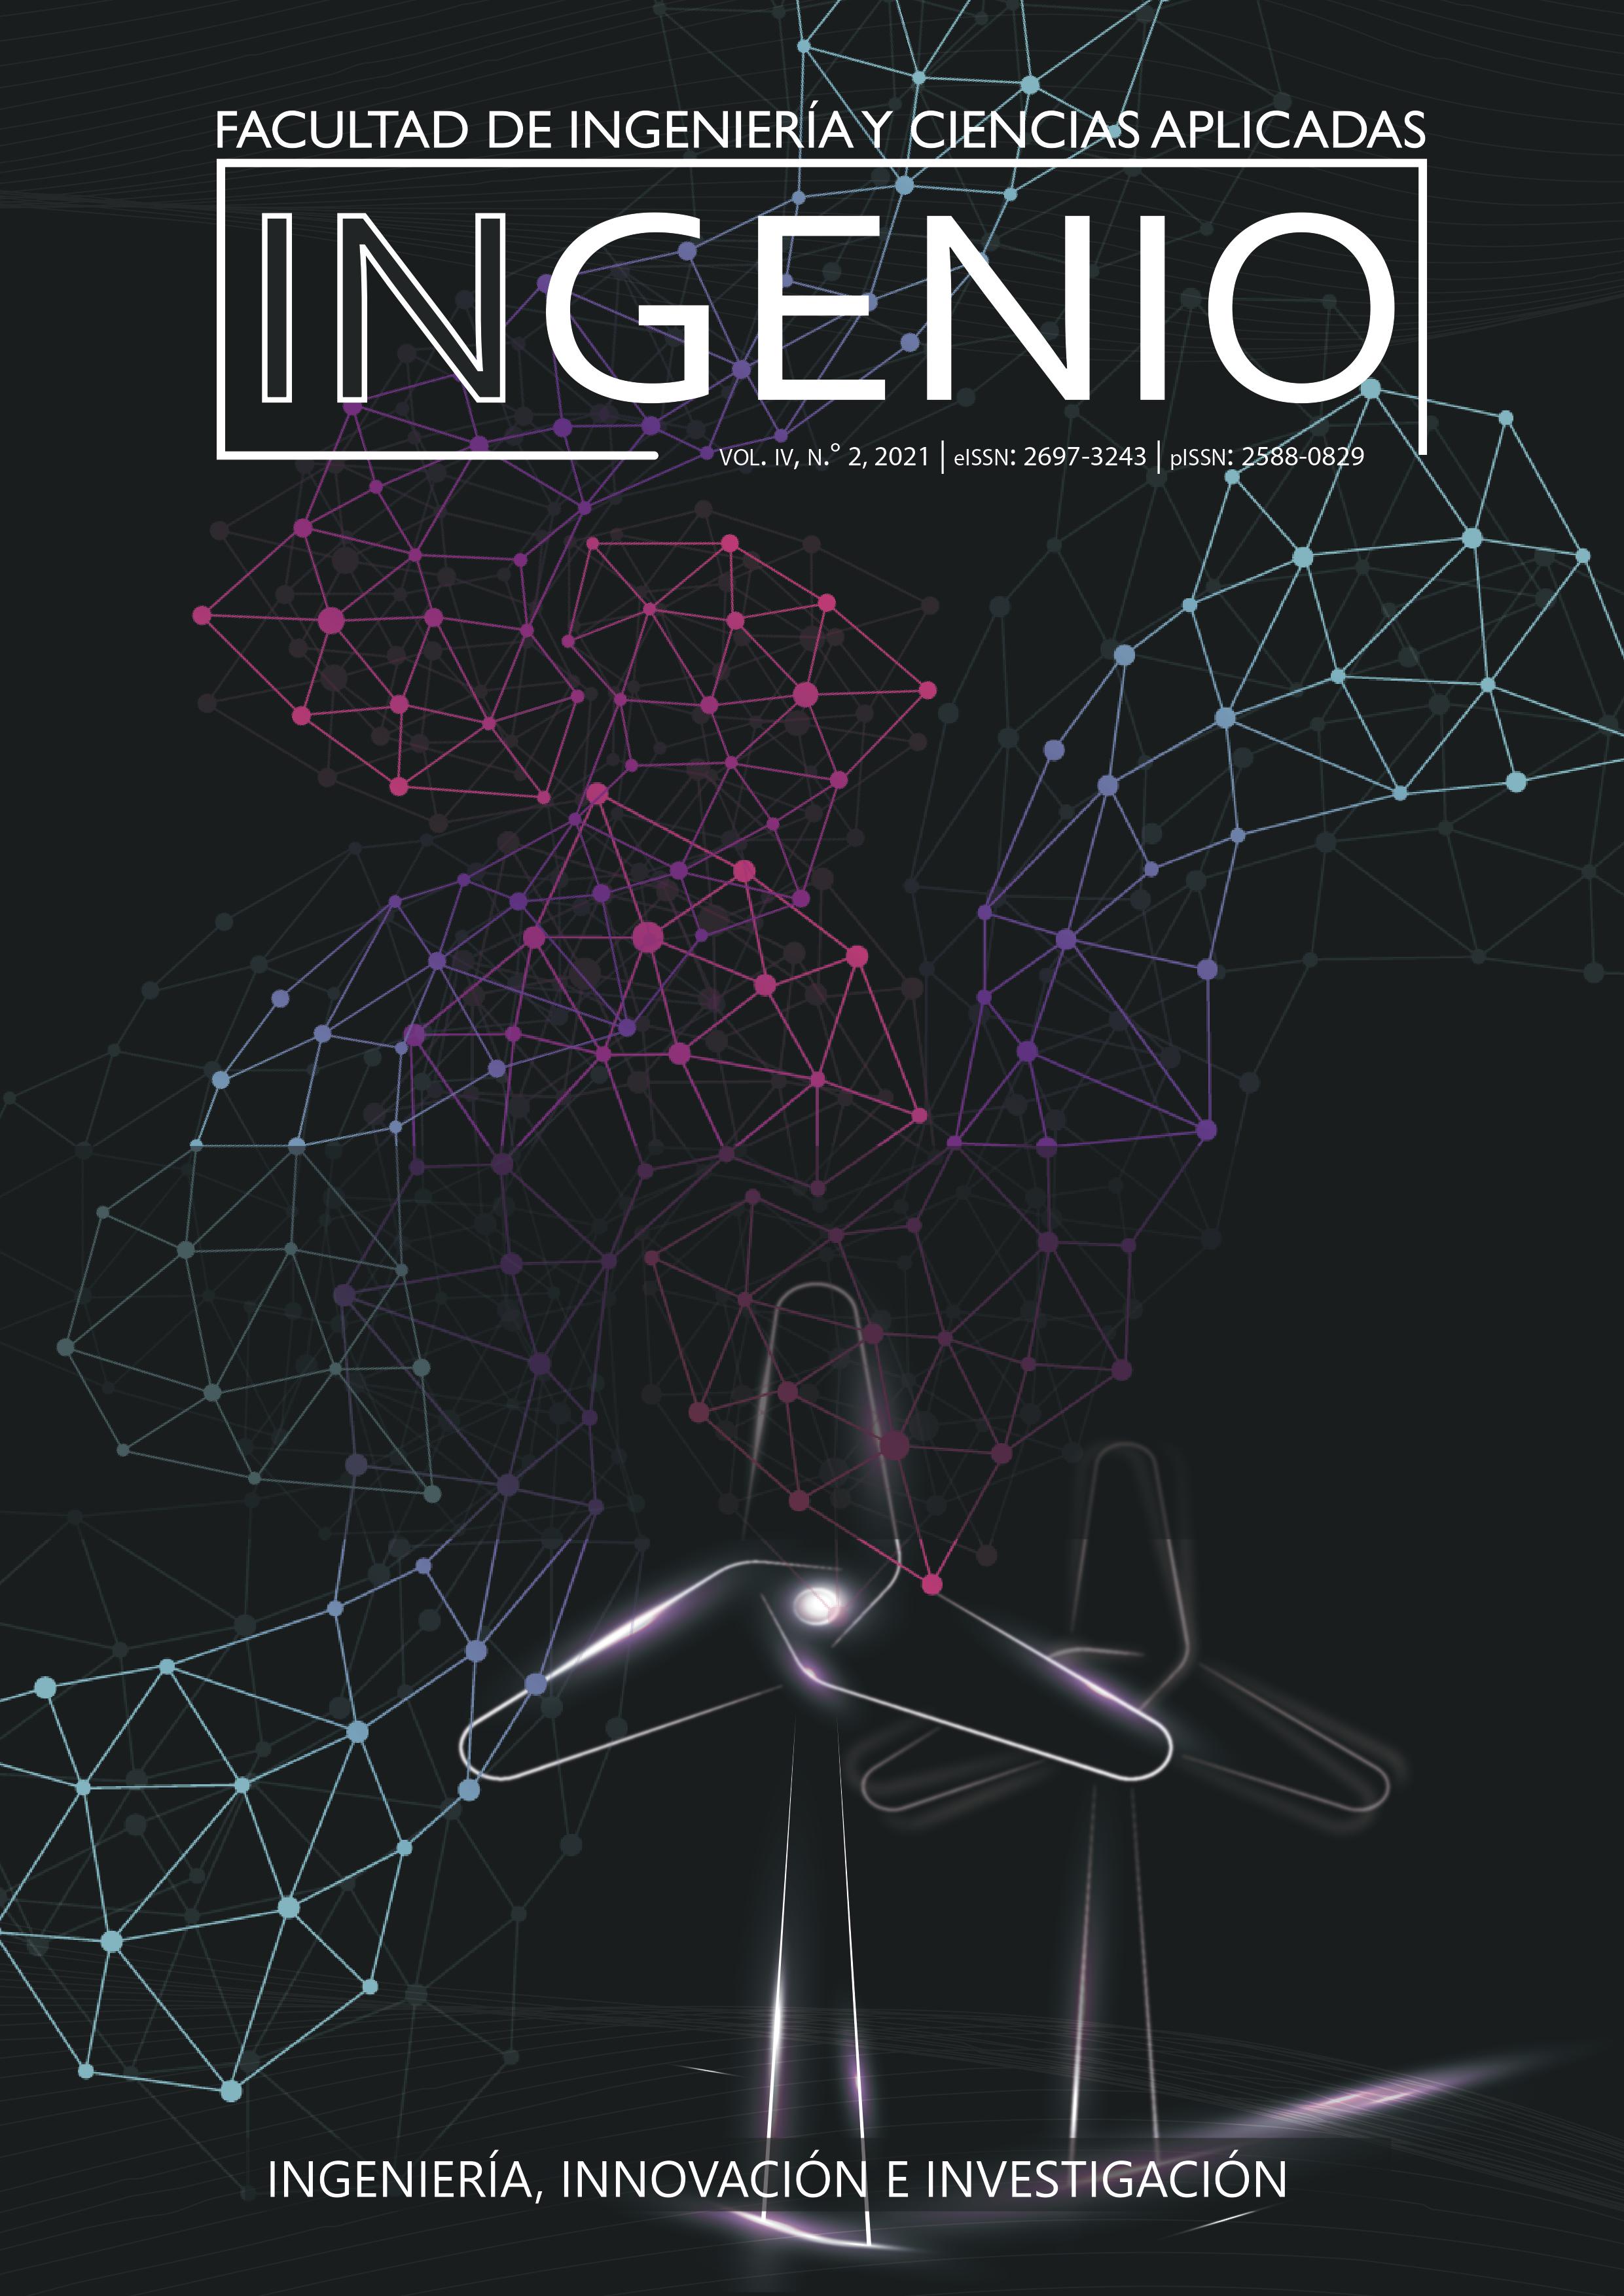 					View Vol. 4 No. 2 (2021): Ingenio Journal, Faculty of Engineering and Applied Sciences
				